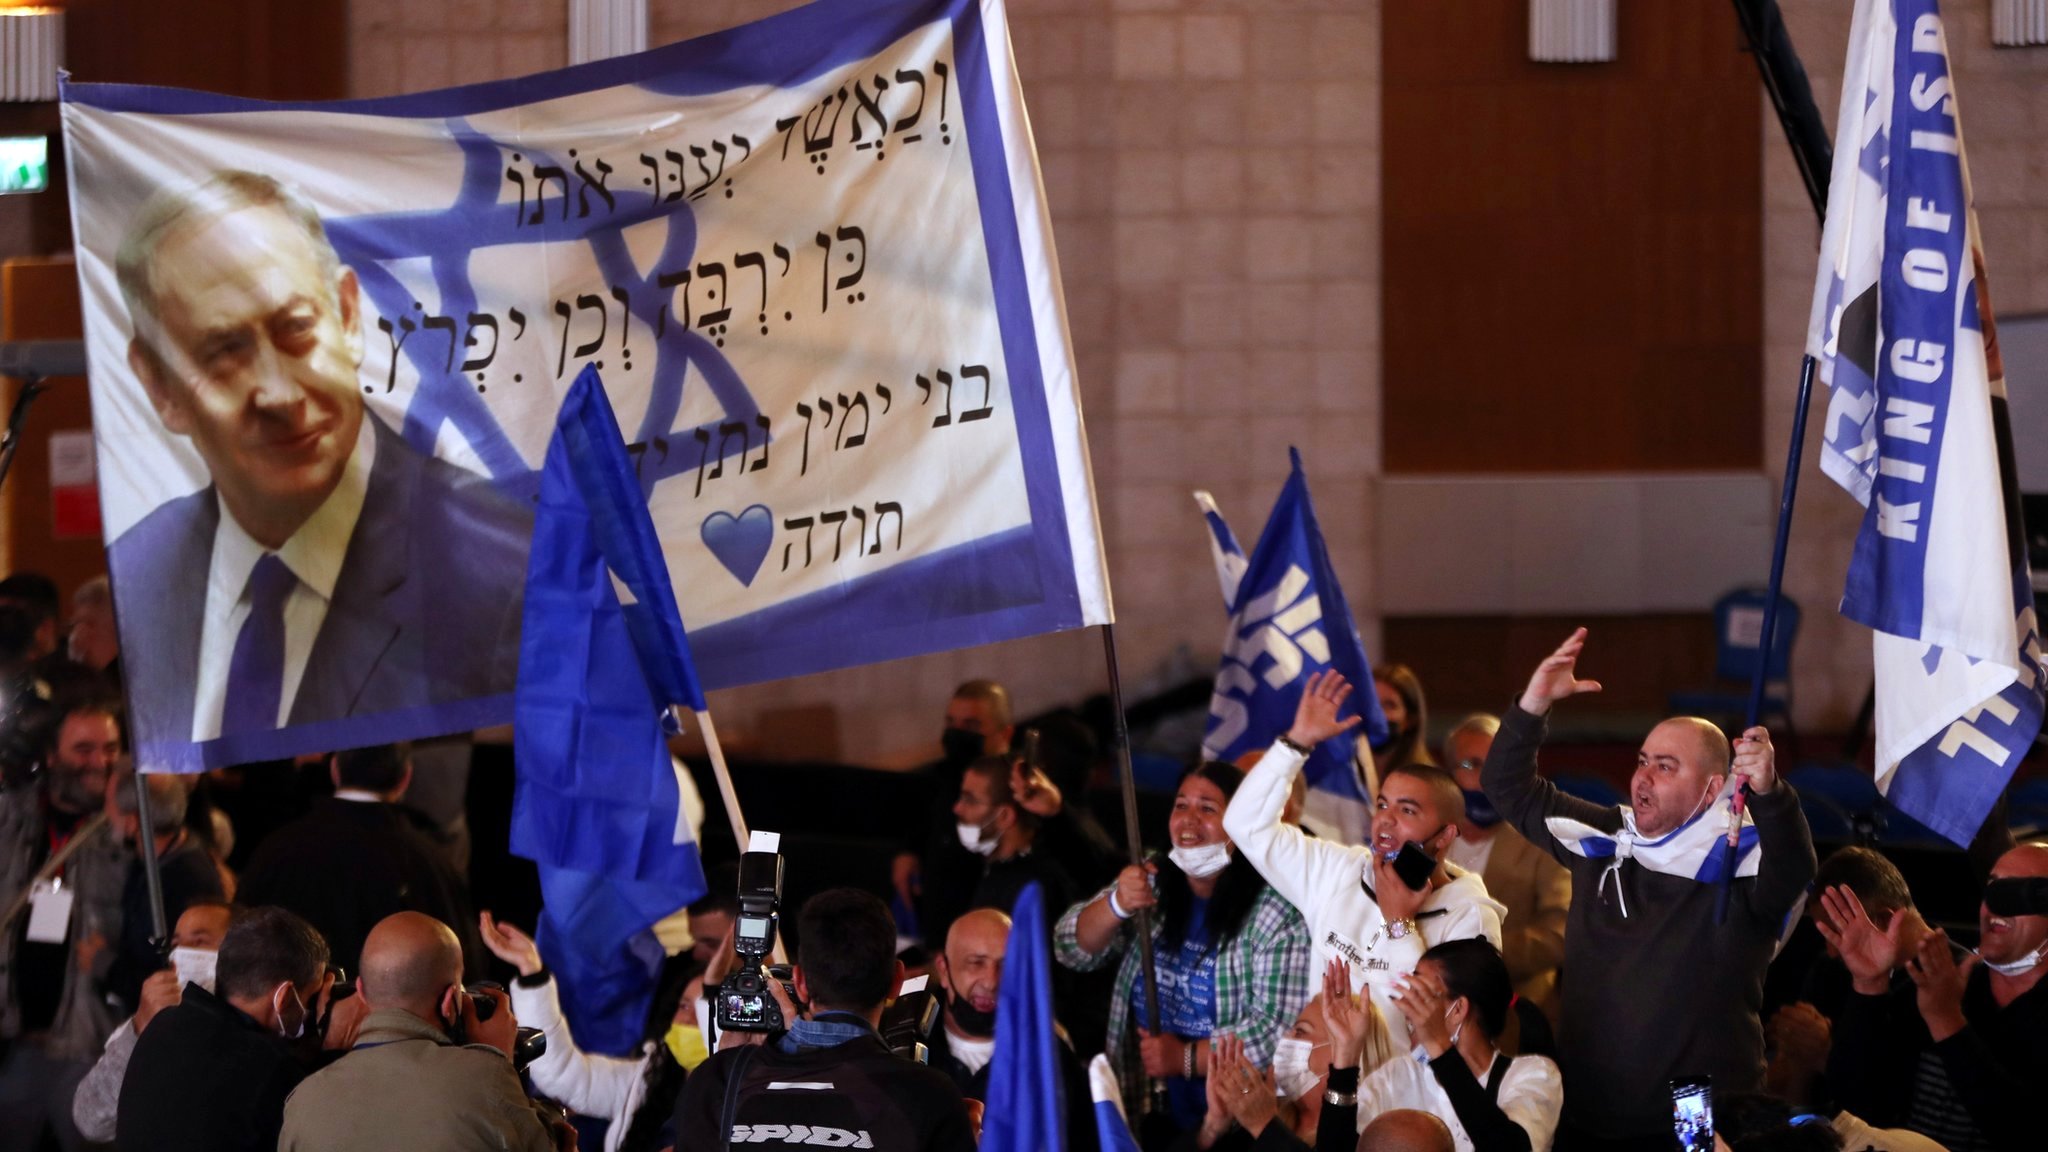 Supporters of Israeli Prime Minister Benjamin Netanyahu's Likud party react following the release of exit polls for the general election on 23 March 2021